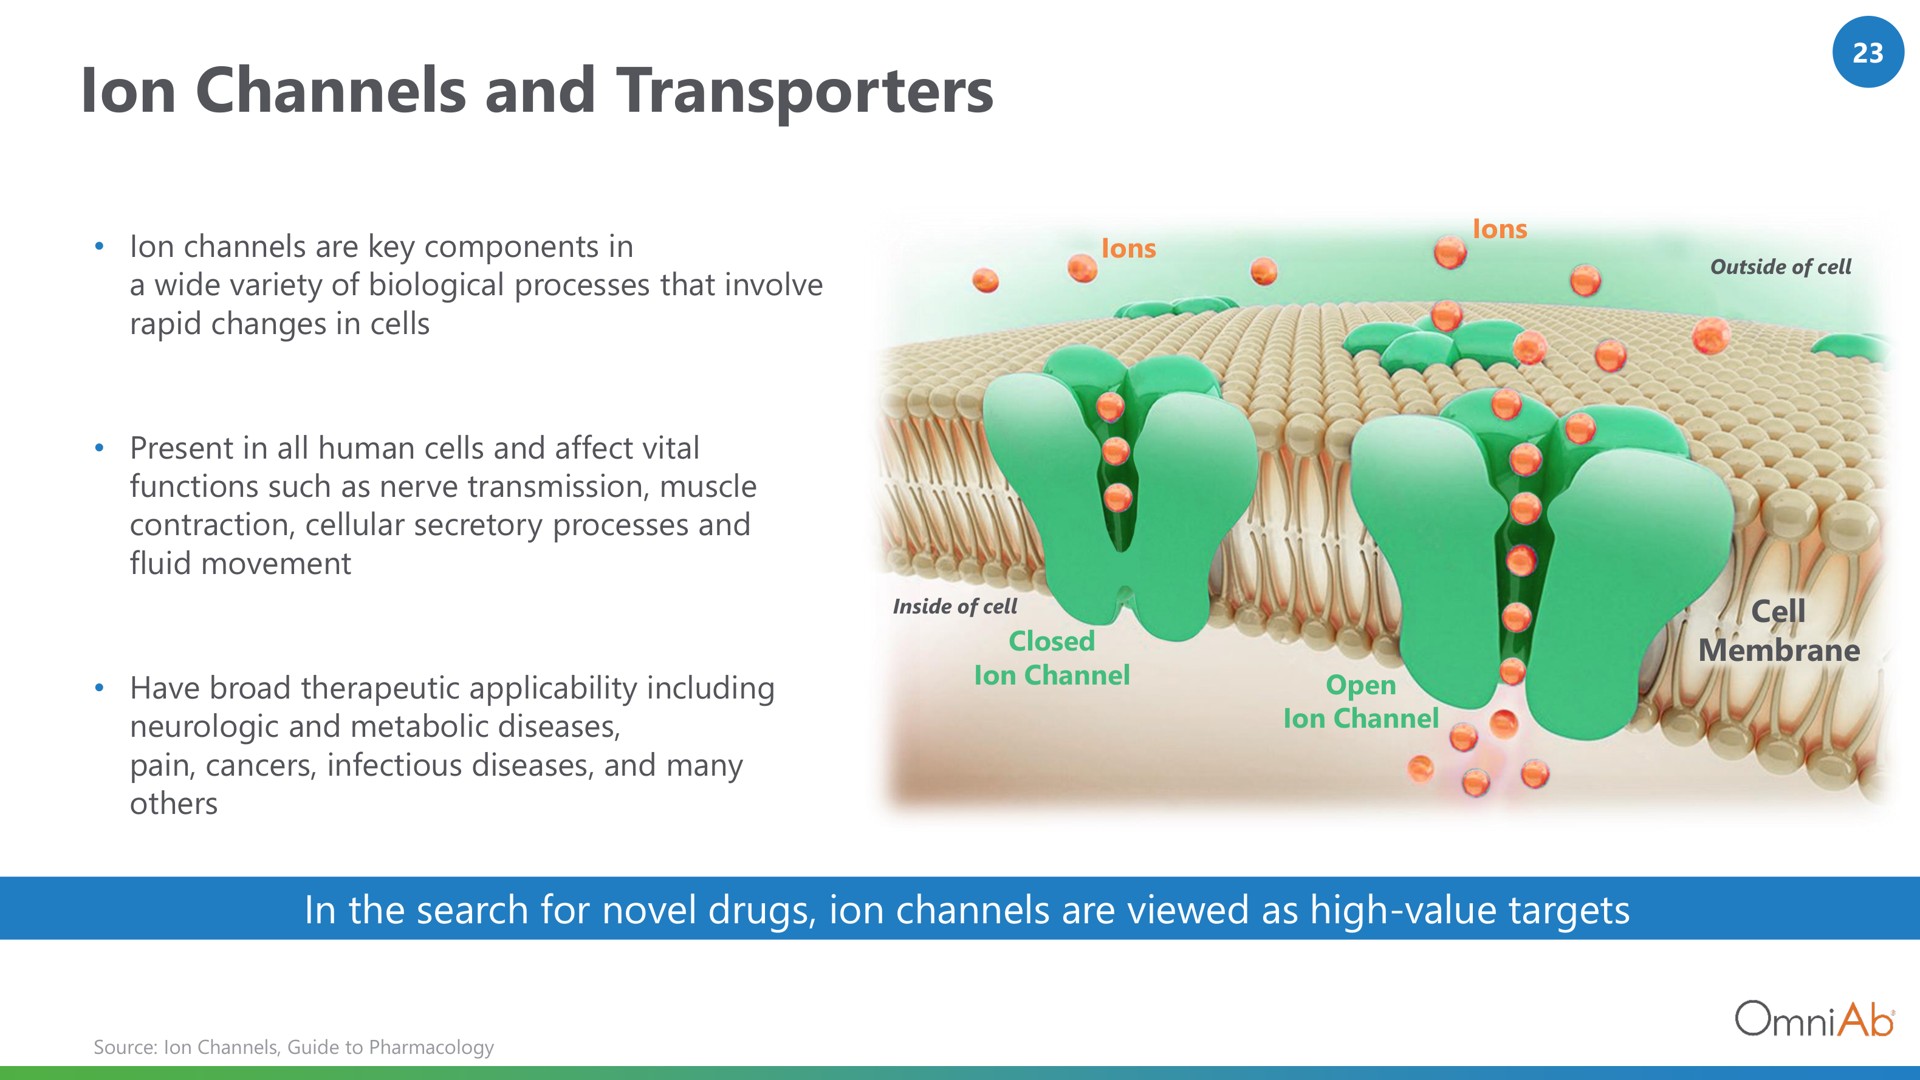 ion channels and transporters | OmniAb